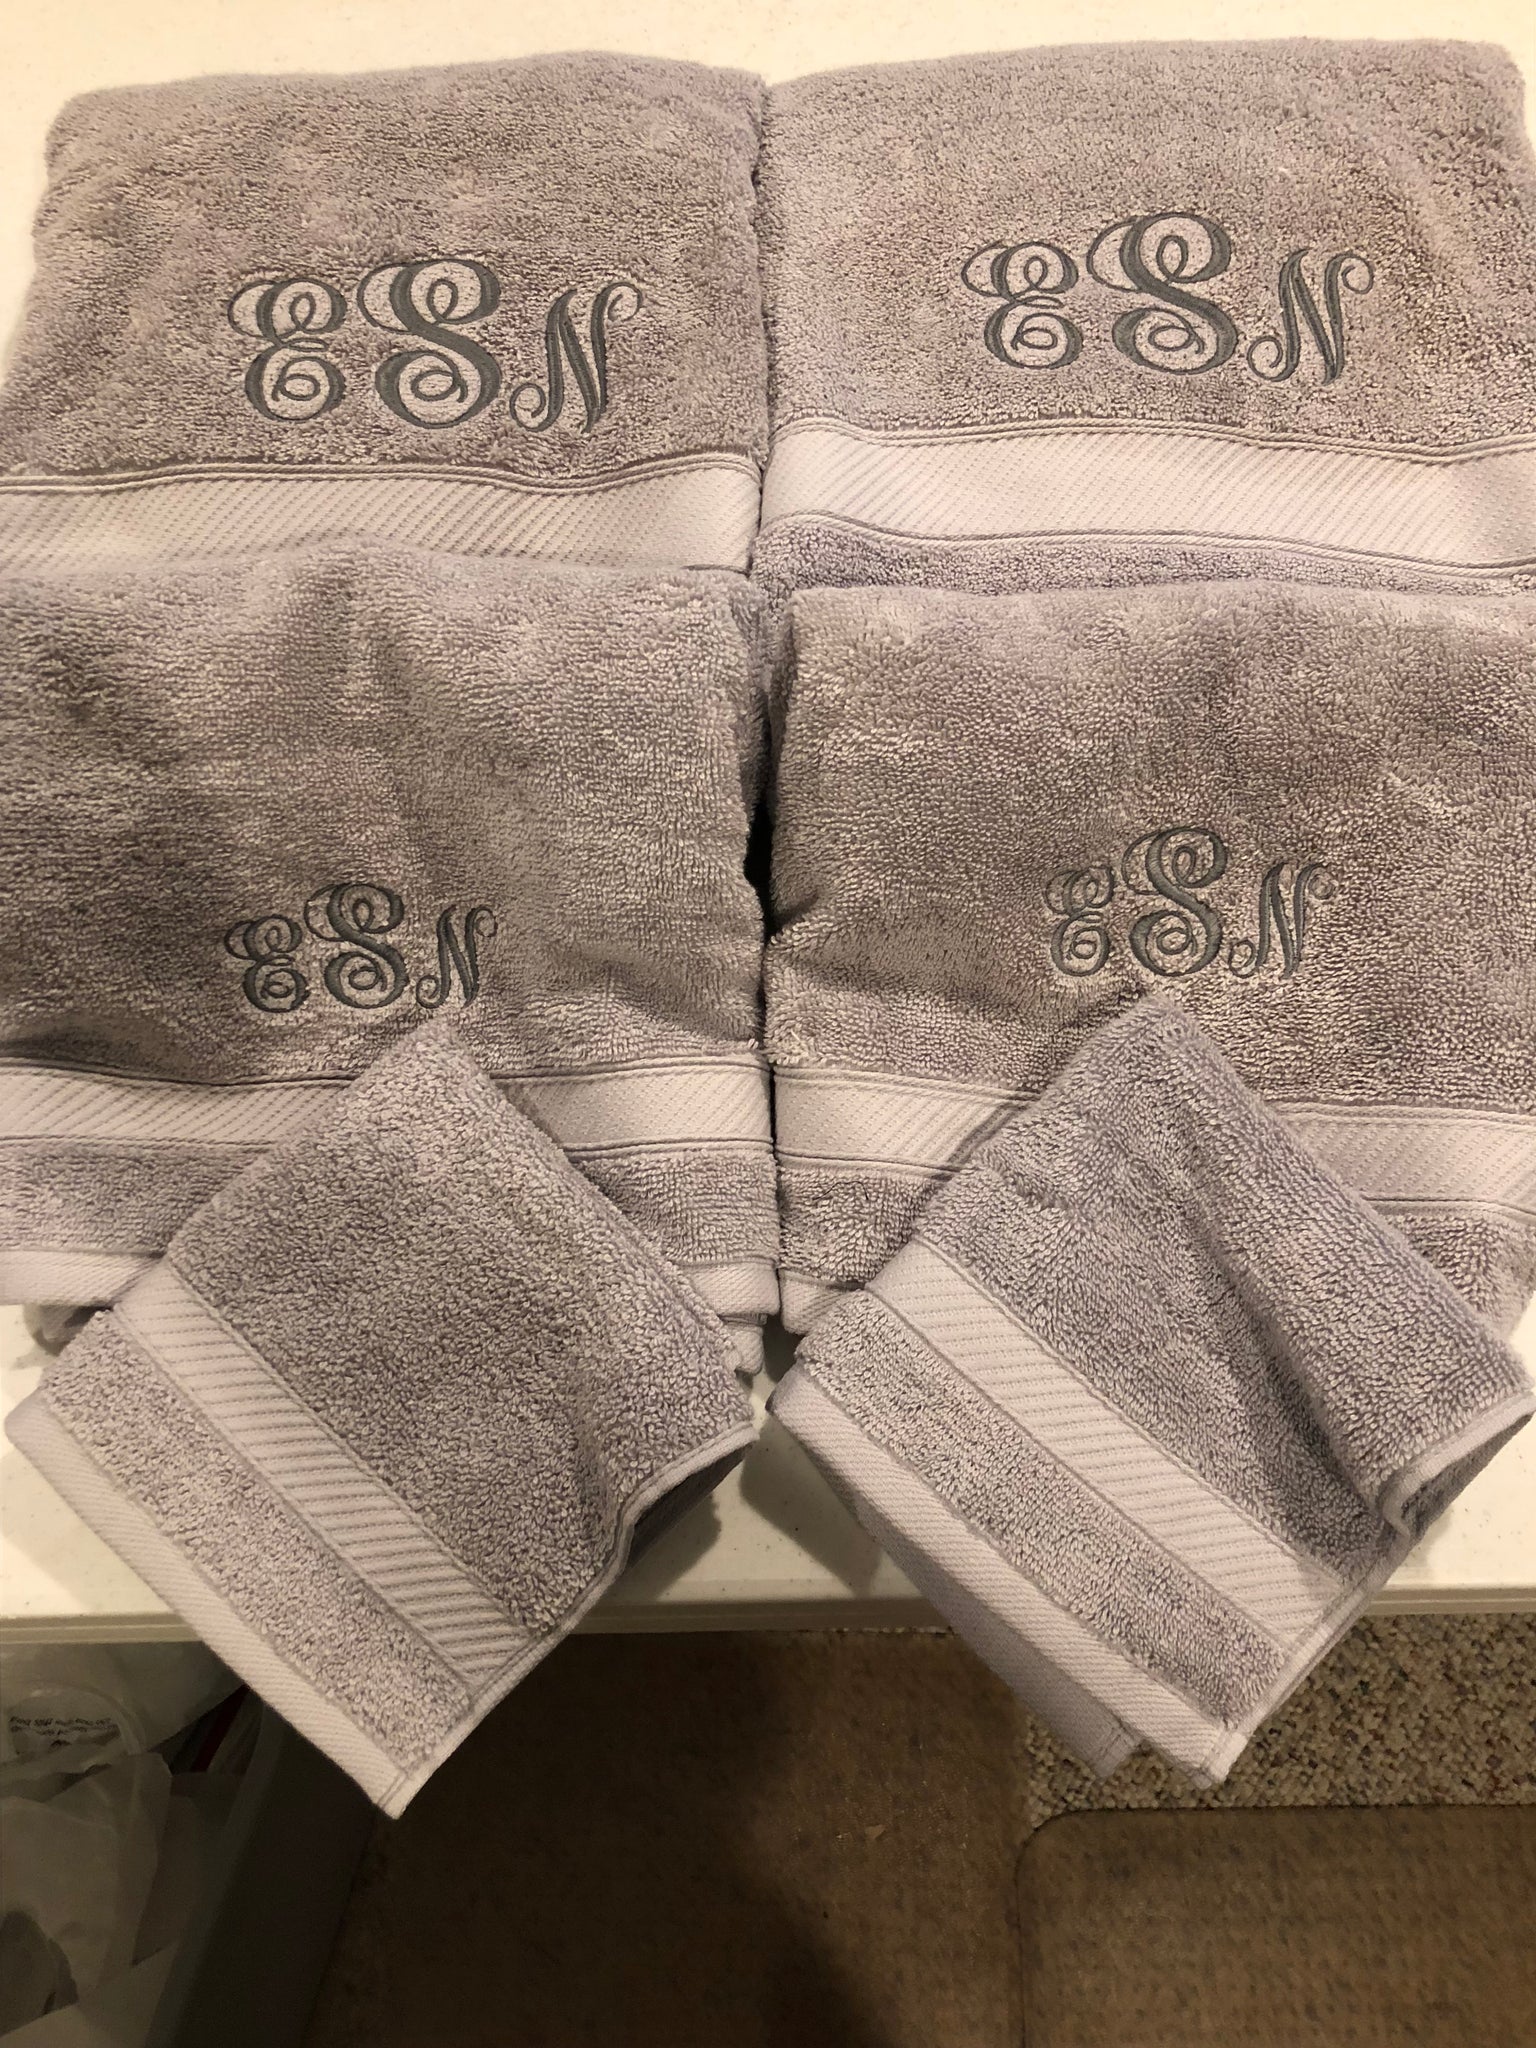 6 Piece Monogrammed Towel Set - Excellent Gift for Grads, New Homeowners or  Yourself!